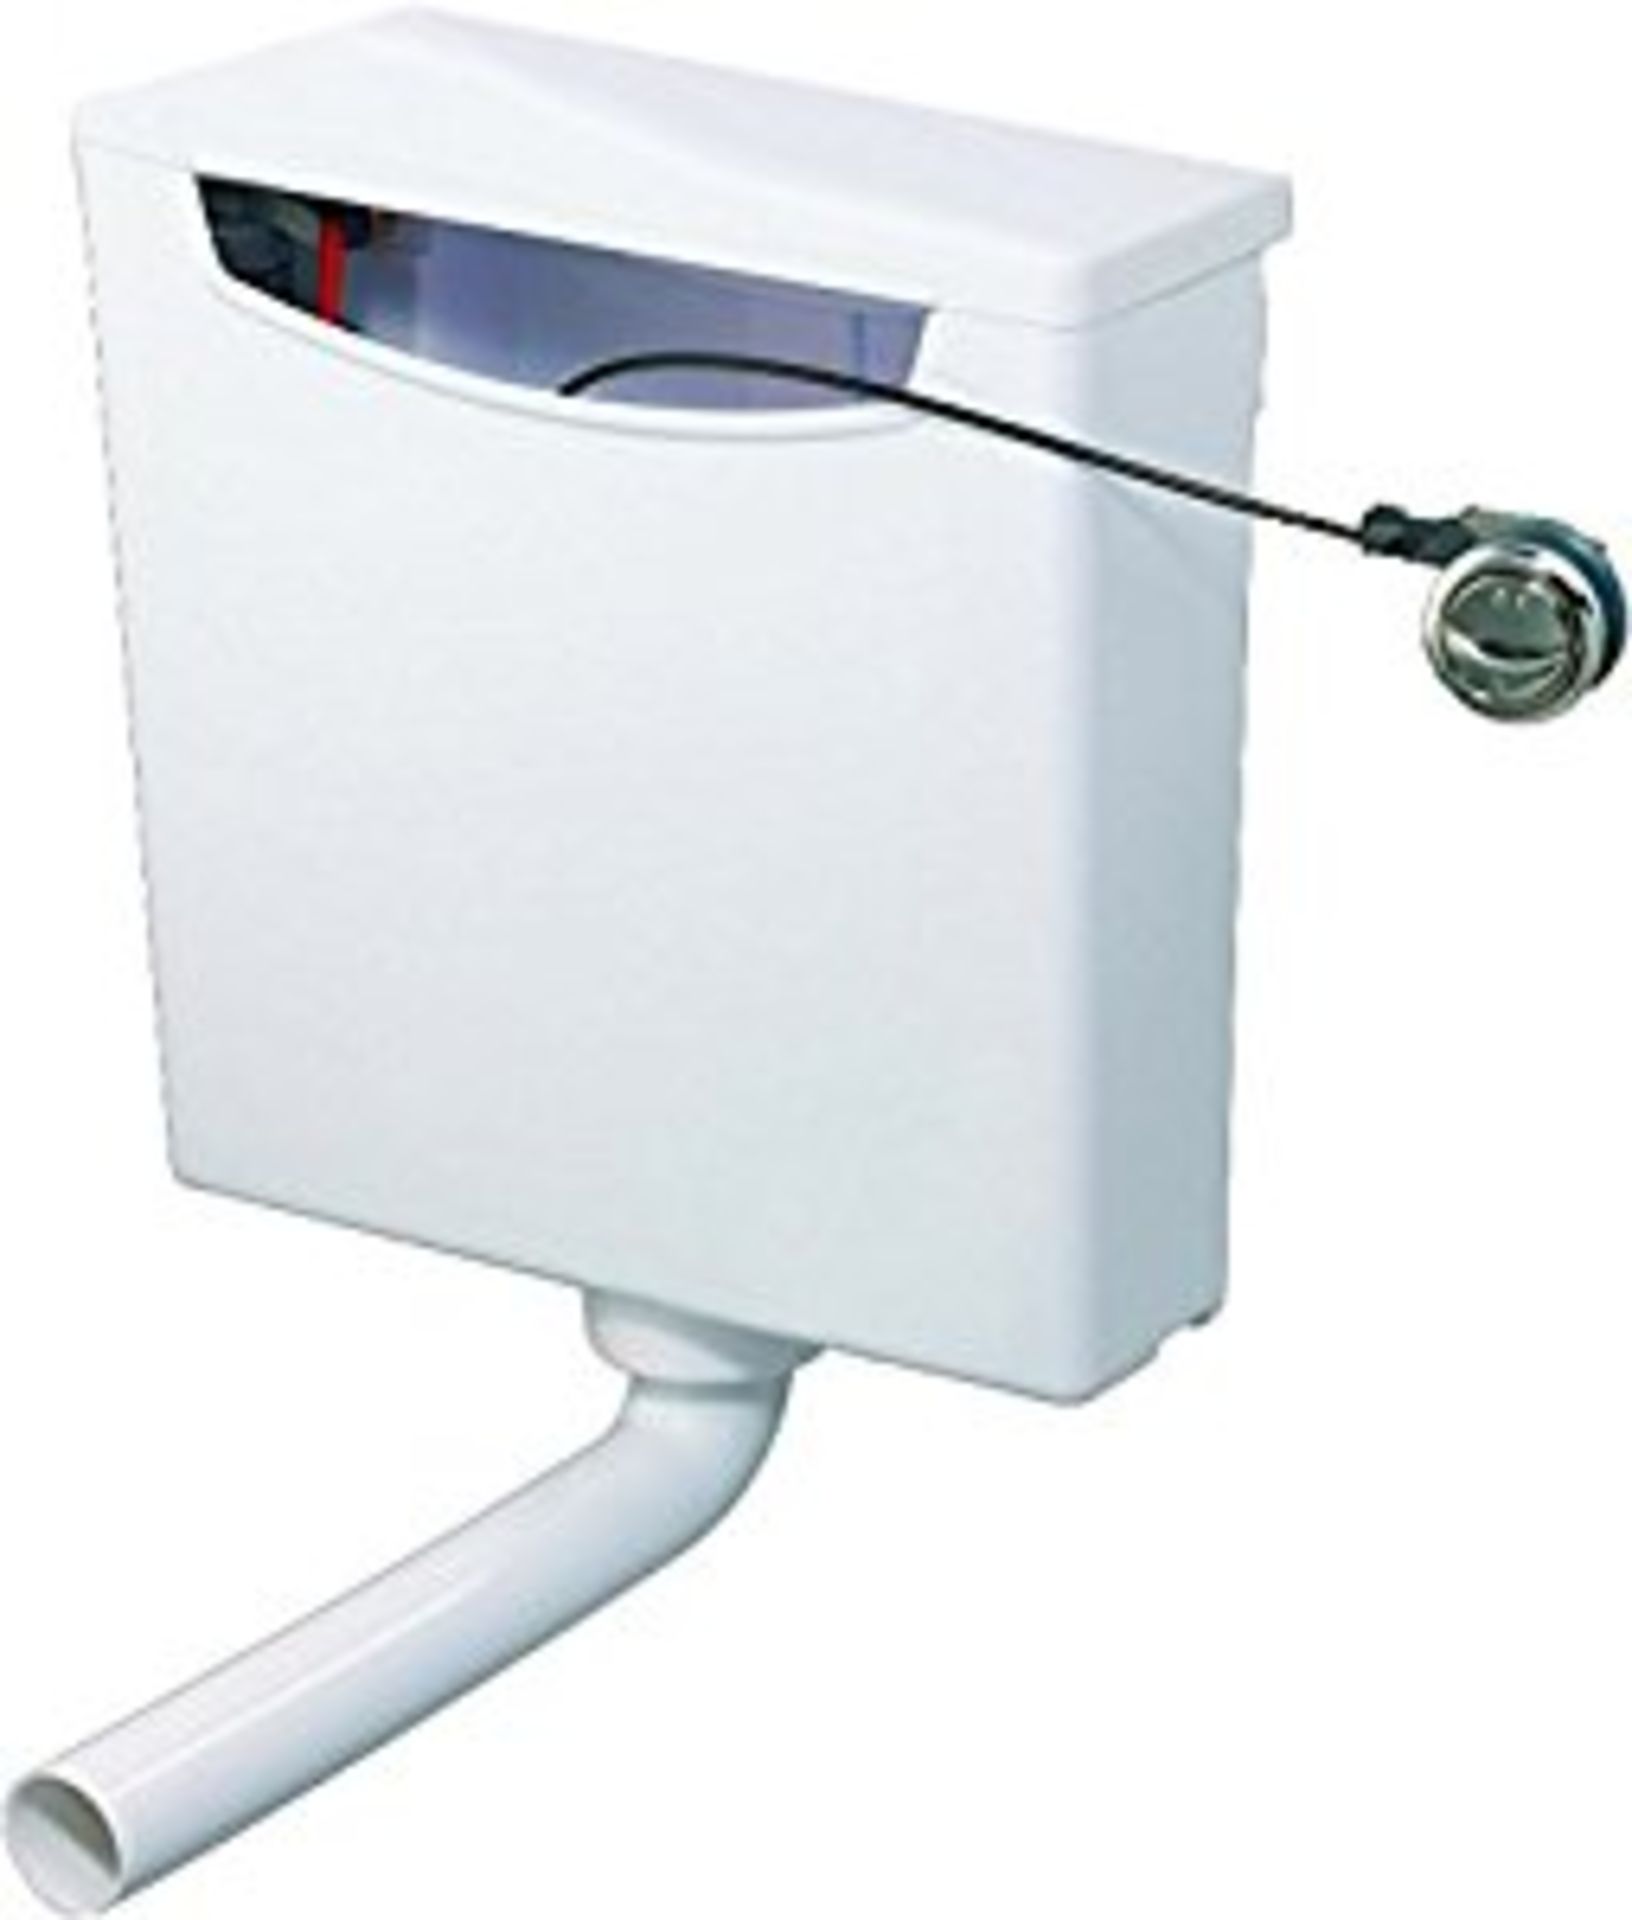 1 x Wirquin Concealed Cistern With Bottom Entry - Unused Stock - CL190 - Ref BR124 - Location: